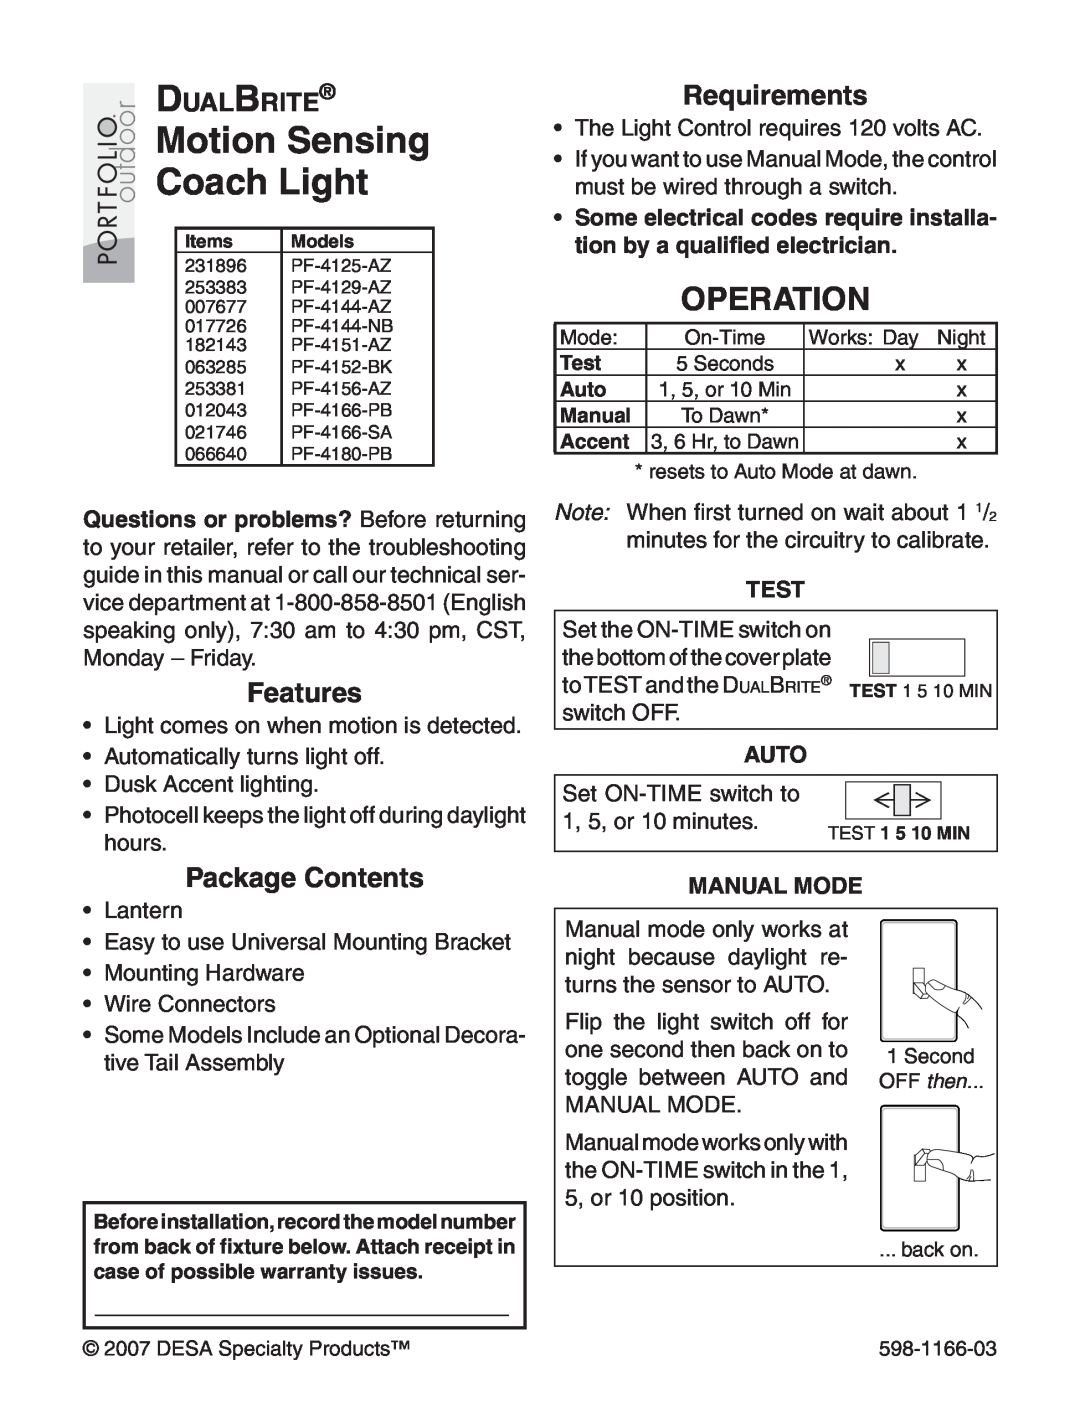 Heath Zenith PF-4144-NB warranty Motion Sensing Coach Light, Operation, Requirements, Features, Package Contents, Test 